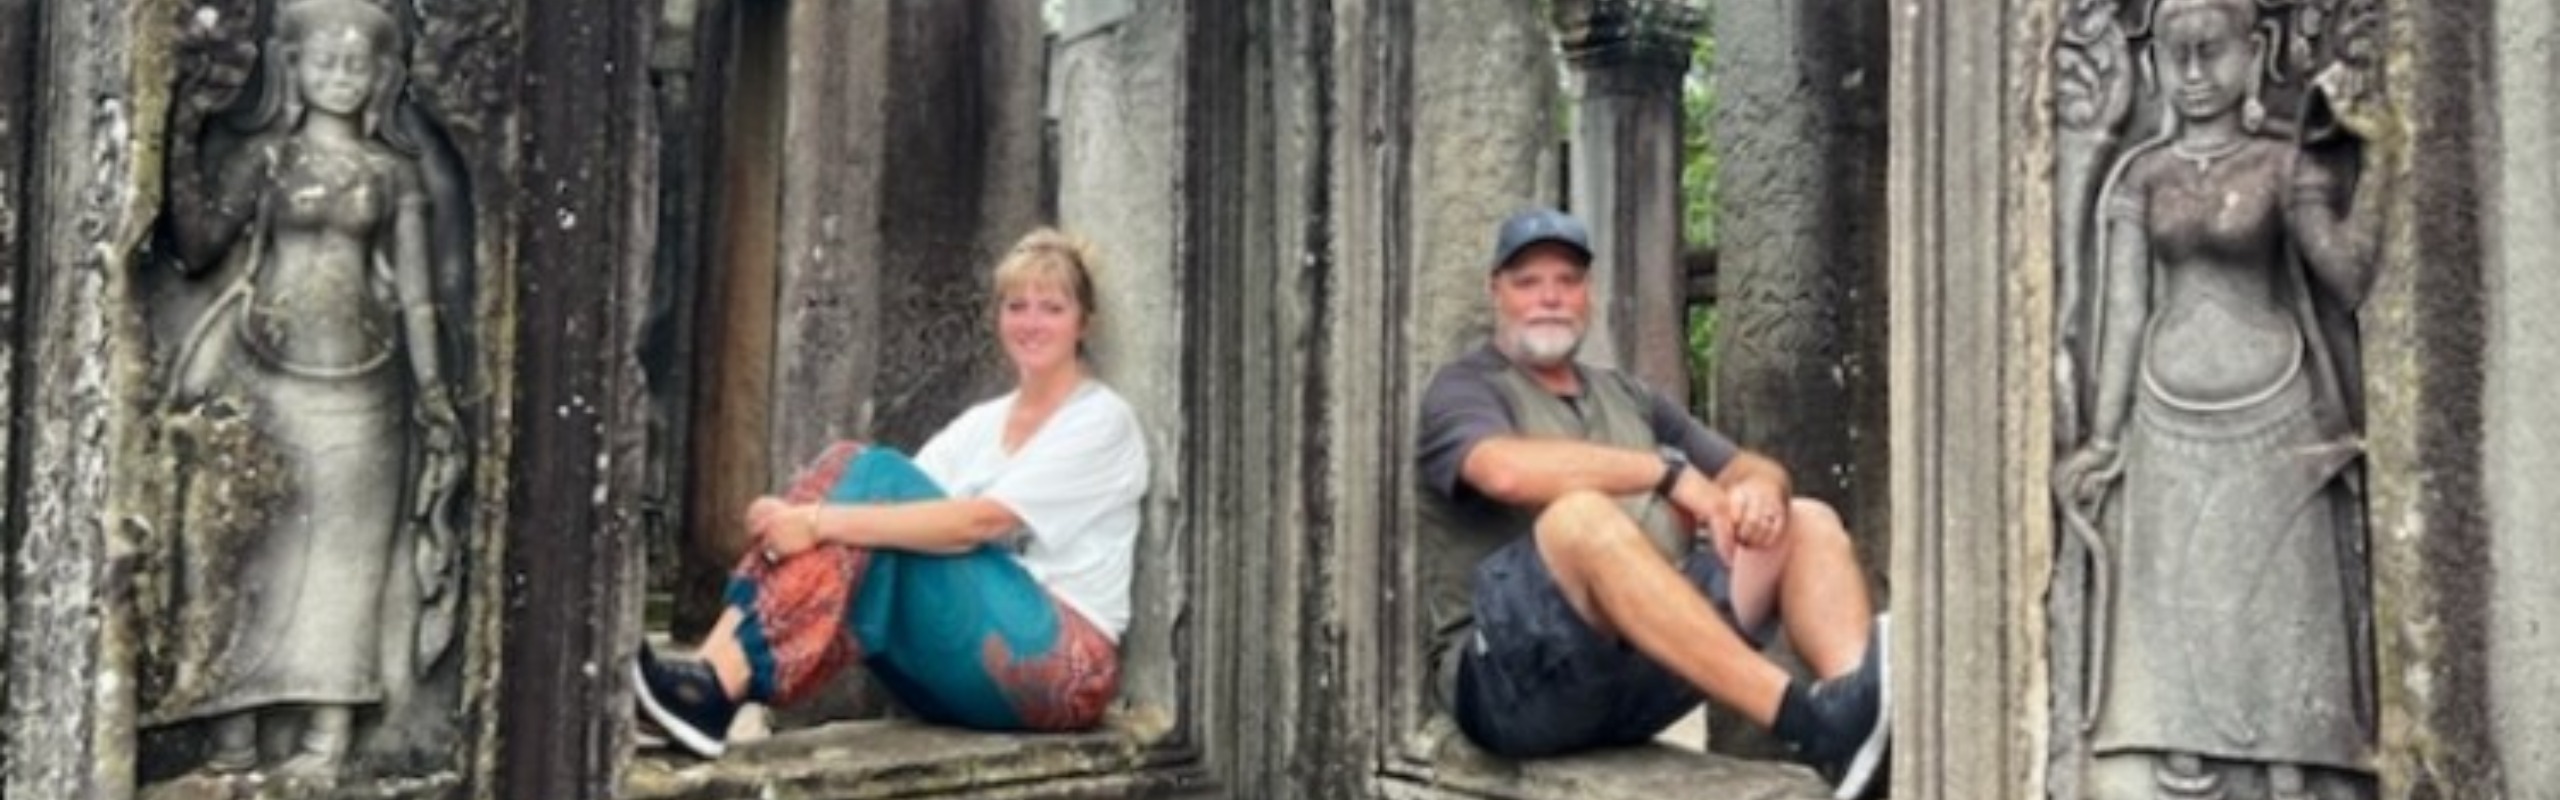 2-Week Itineraries in Thailand, Cambodia and Vietnam for Families, Couples, and First-Timers